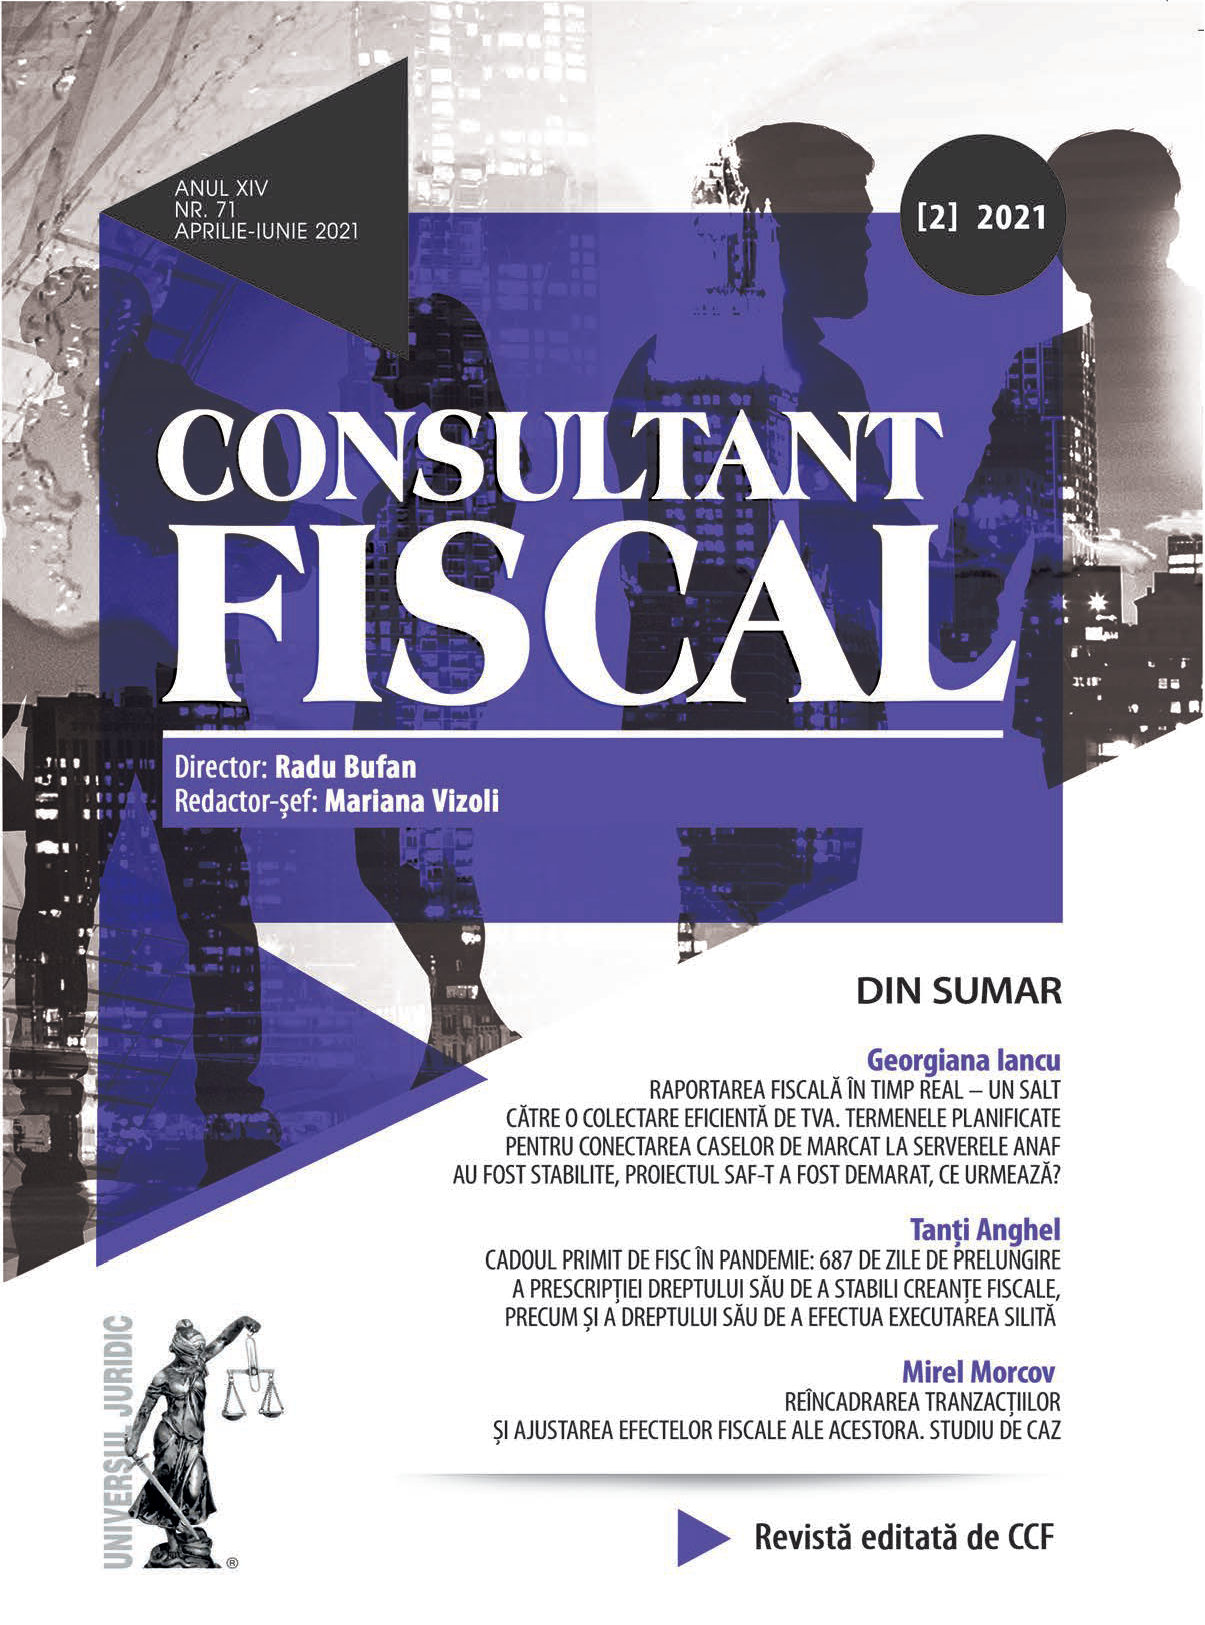 The "FISCAL CONSULTANT" changes the switch Cover Image